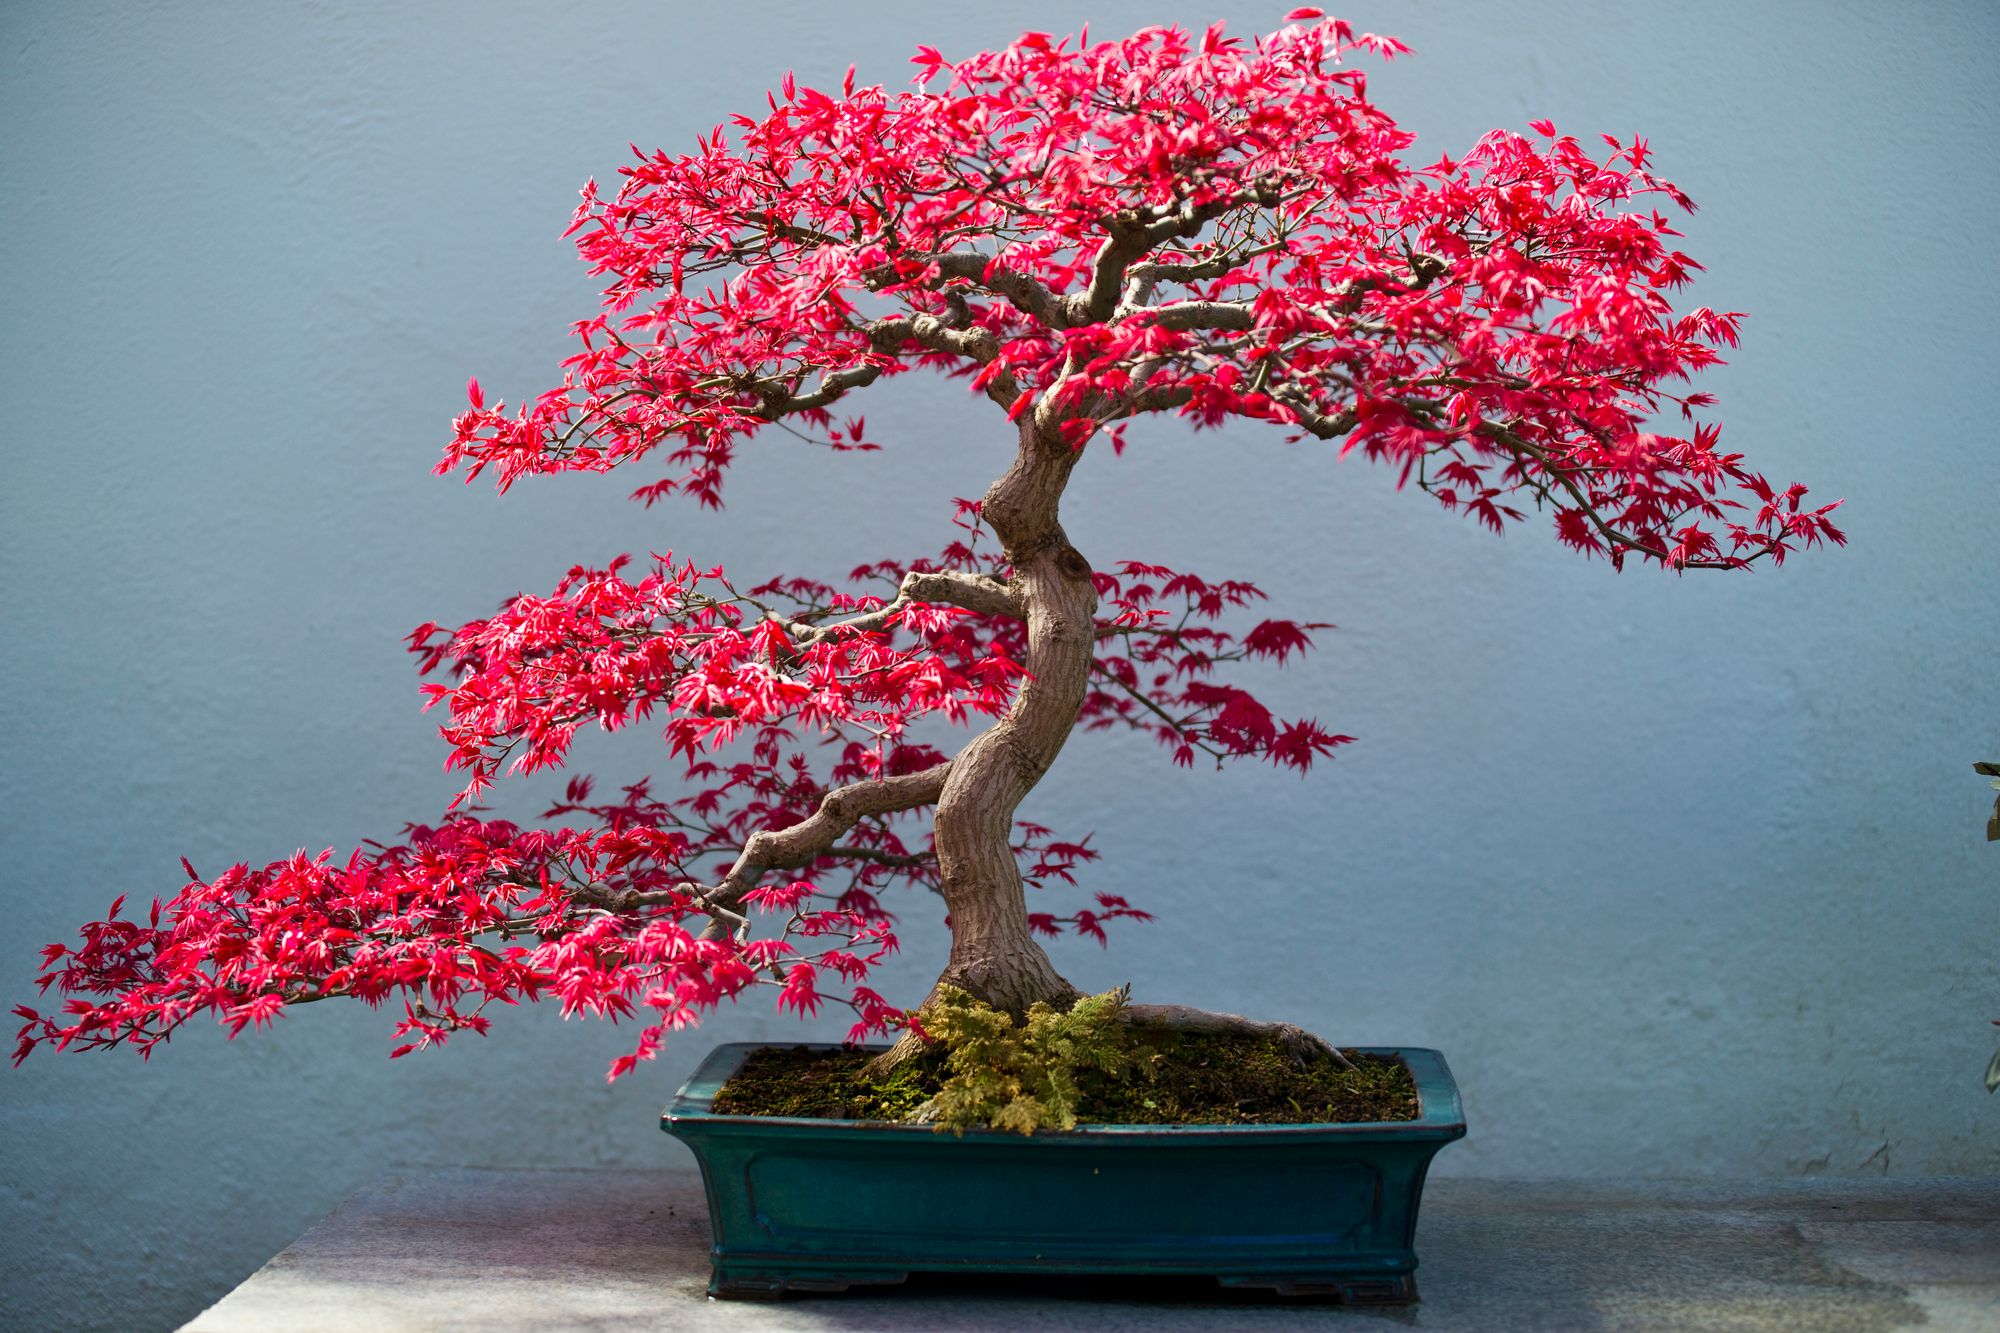 Indoor grown bonsai tree with red leaves planted in a rectangular pot